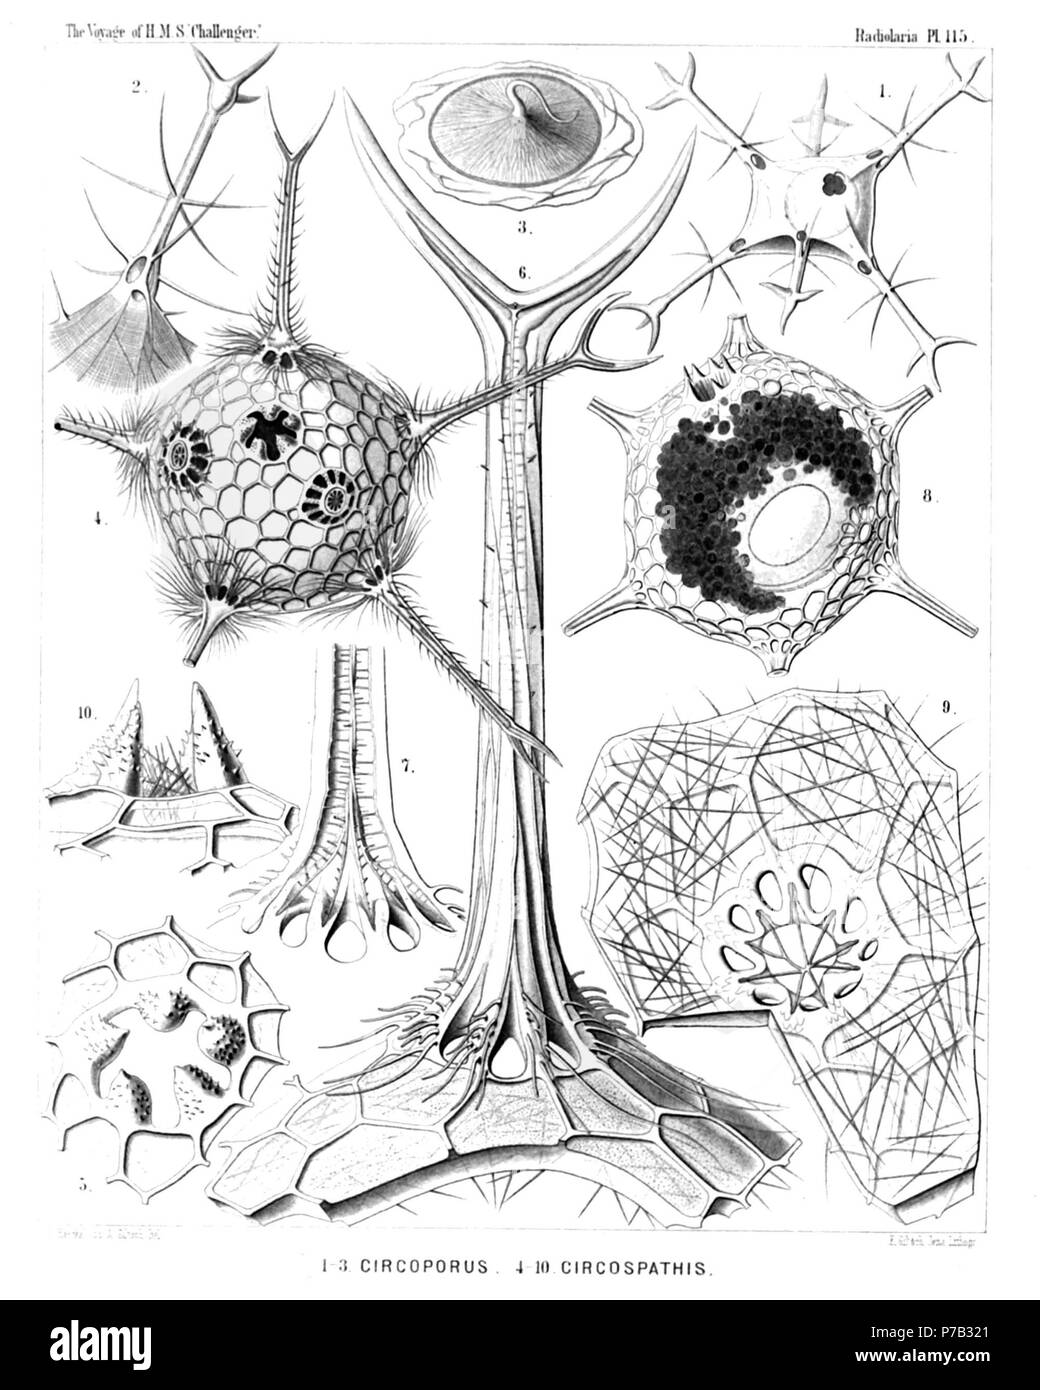 English: Illustration from Report on the Radiolaria collected by H.M.S. Challenger during the years 1873-1876. Part III. Original description follows:  Plate 115. Circoporida.  Diam.  Fig. 1. Circoporus sexfuscinus, n. sp., × 100  The cruciform mouth is visible in the upper part of the figure, to the right.  Fig. 2. Circoporus sexfuscinus, n. sp., × 200  A single radial spine, with four cruciate pores at the base.  Fig. 3. Circoporus sexfuscinus, n. sp., × 600  The radiate operculum of the central capsule, with the proboscis.  Fig. 4. Circospathis furcata, n. sp., × 100  Five of the nine spine Stock Photo